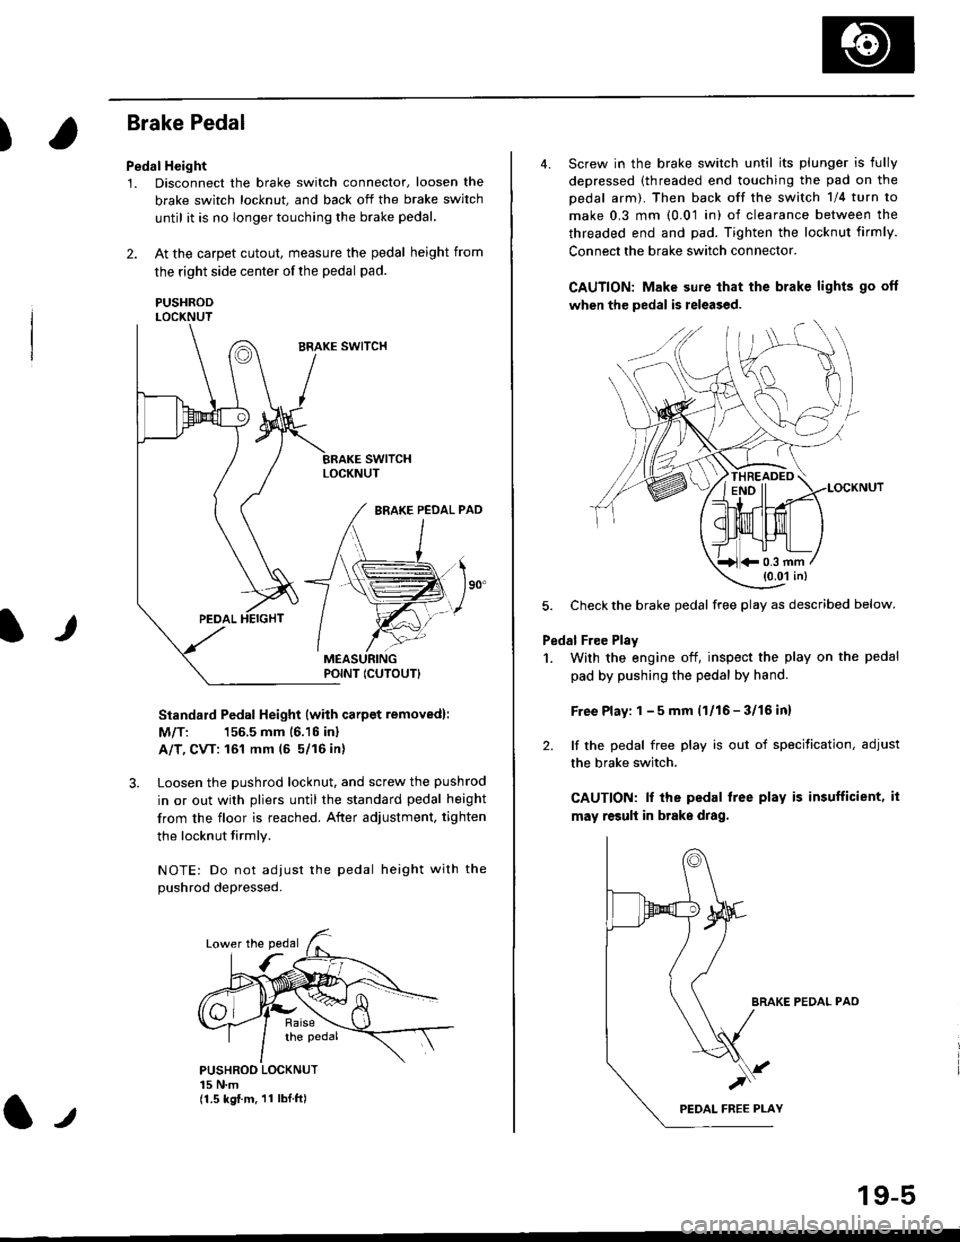 HONDA CIVIC 1998 6.G Workshop Manual )
Brake Pedal
Pedal Height
1. Disconnect the brake switch connector, loosen the
brake switch locknut, and back off the brake switch
until it is no longer touching the brake pedal,
2. At the carpet cut